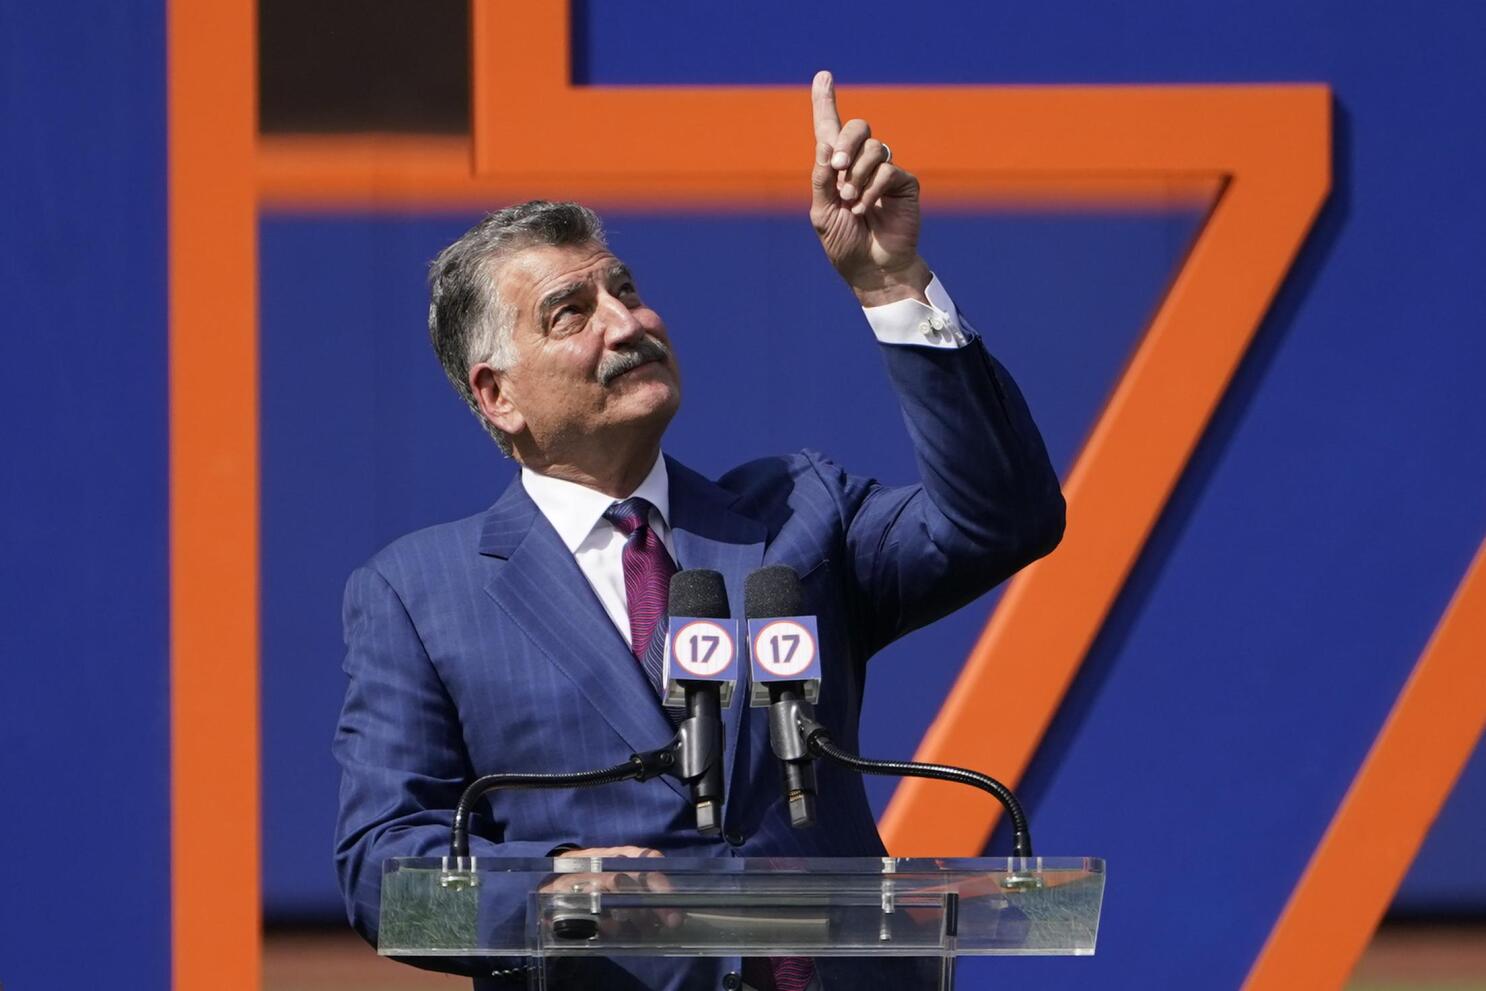 Keith Hernandez's #17 Retired by the Mets, history, Cadillac, New York Mets, From this moment on, #17 is forever enshrined in Mets history.  Congratulations to Keith Hernandez. ➡️ Cadillac, By SNY